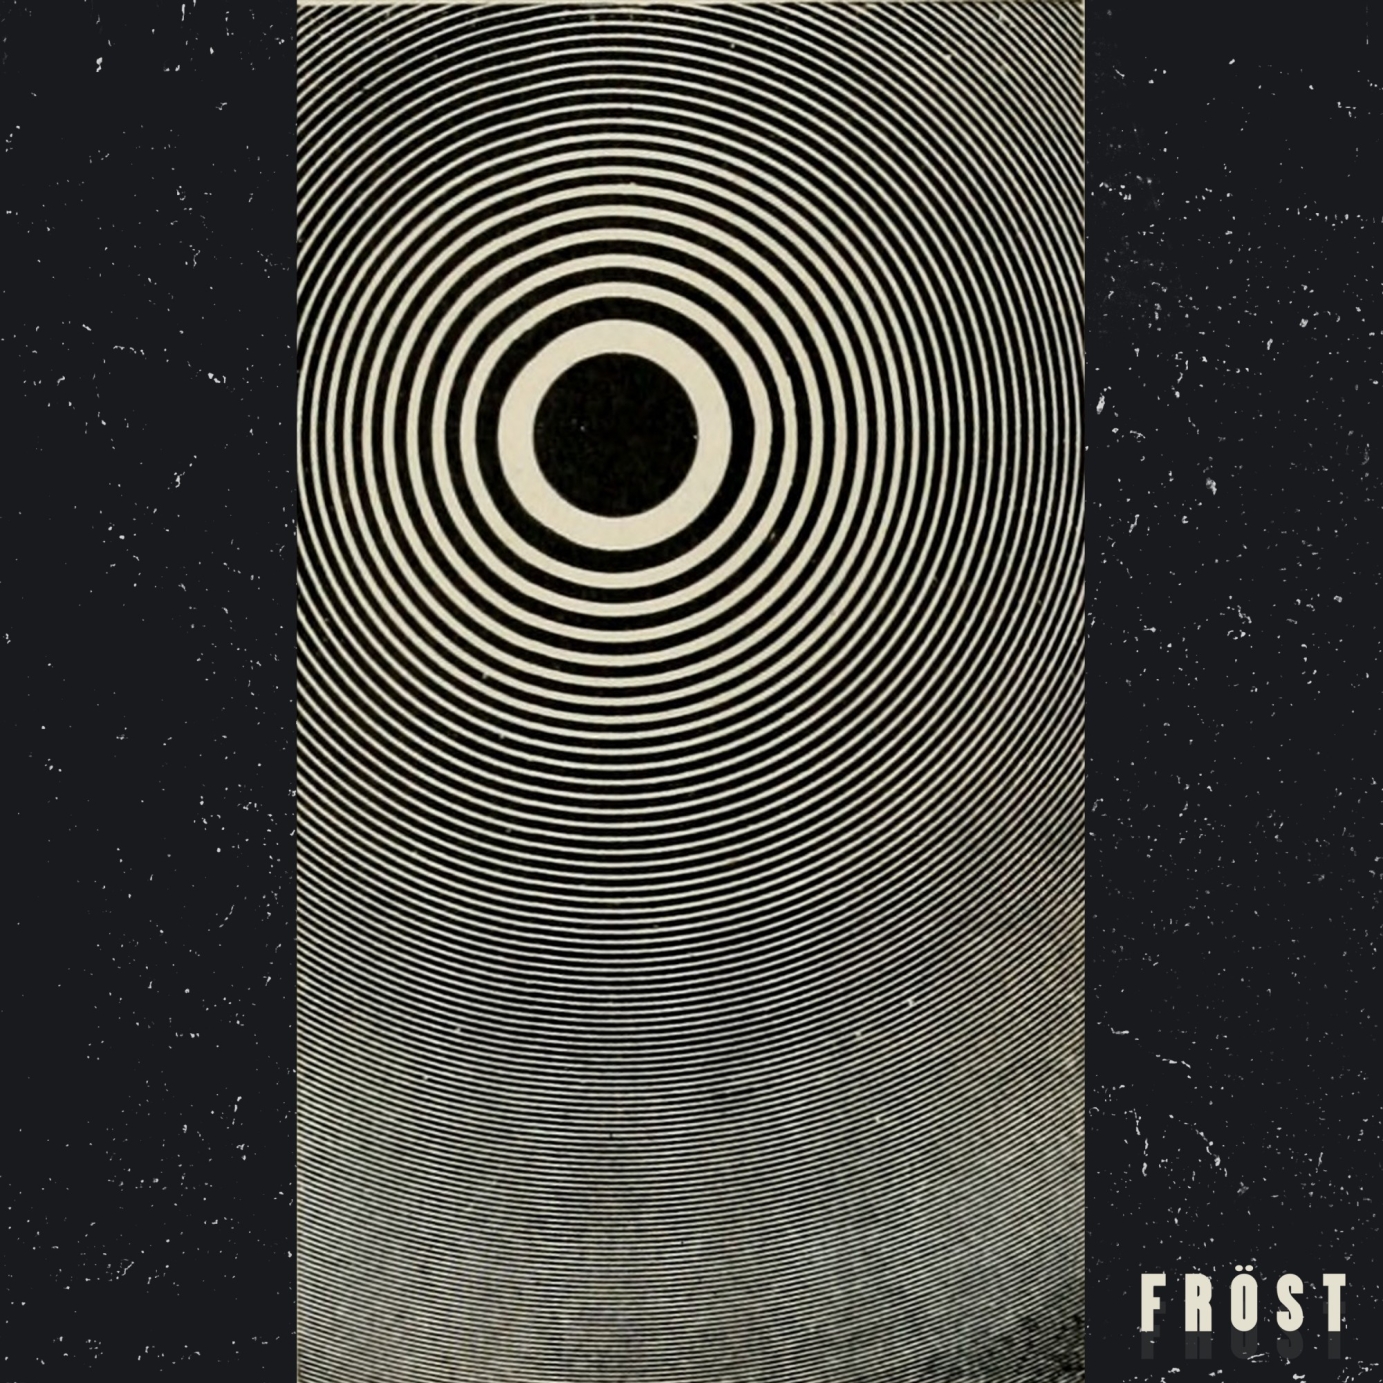 Artwork, Design & Creative direction for FROST by evabowan